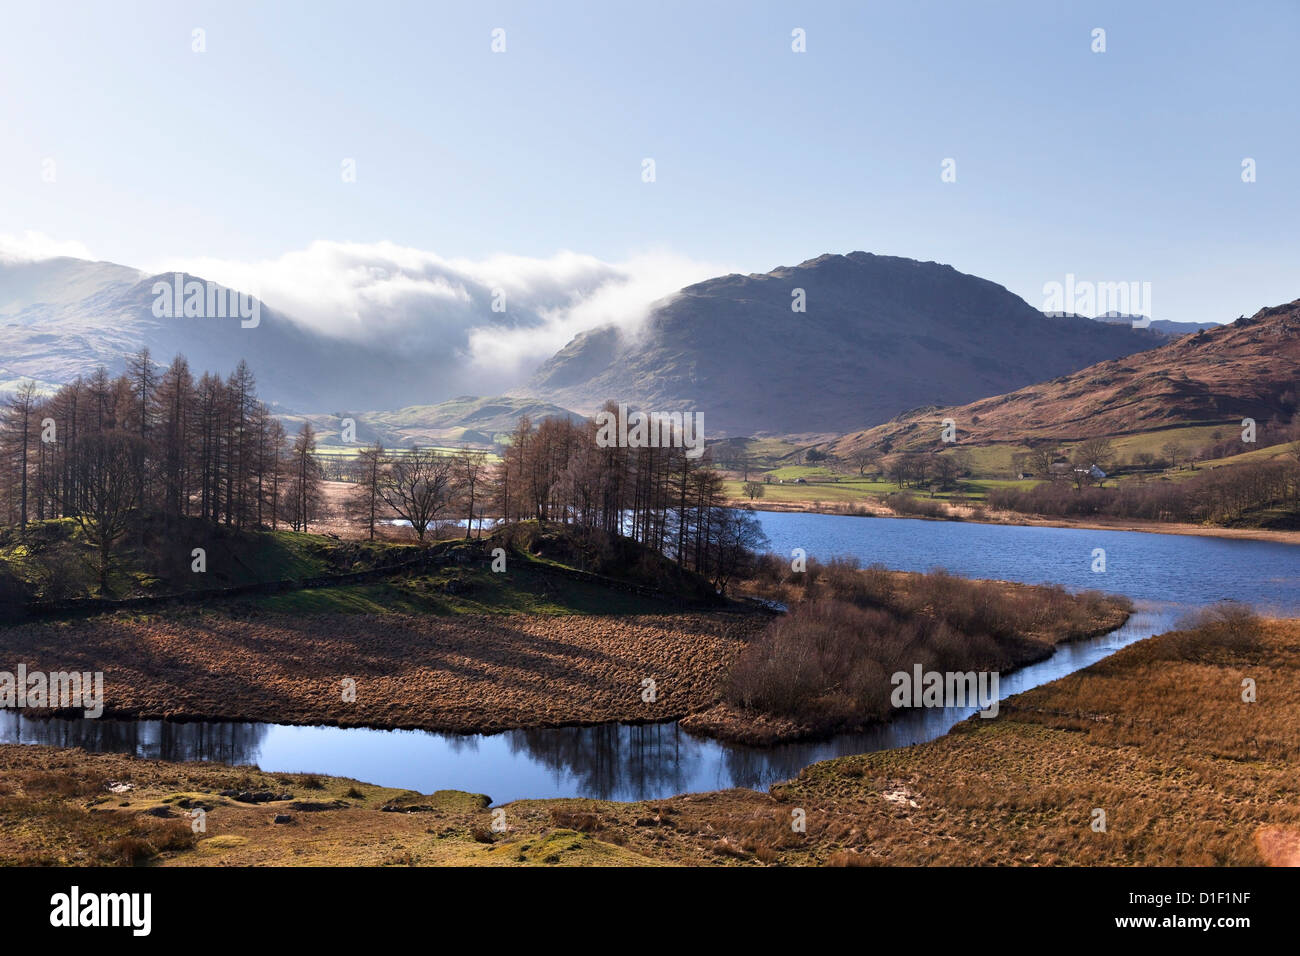 Little Langdale Tarn e fiume Brathay con Wrynose fells oltre, Little Langdale, Lake District, Cumbria, England, Regno Unito Foto Stock